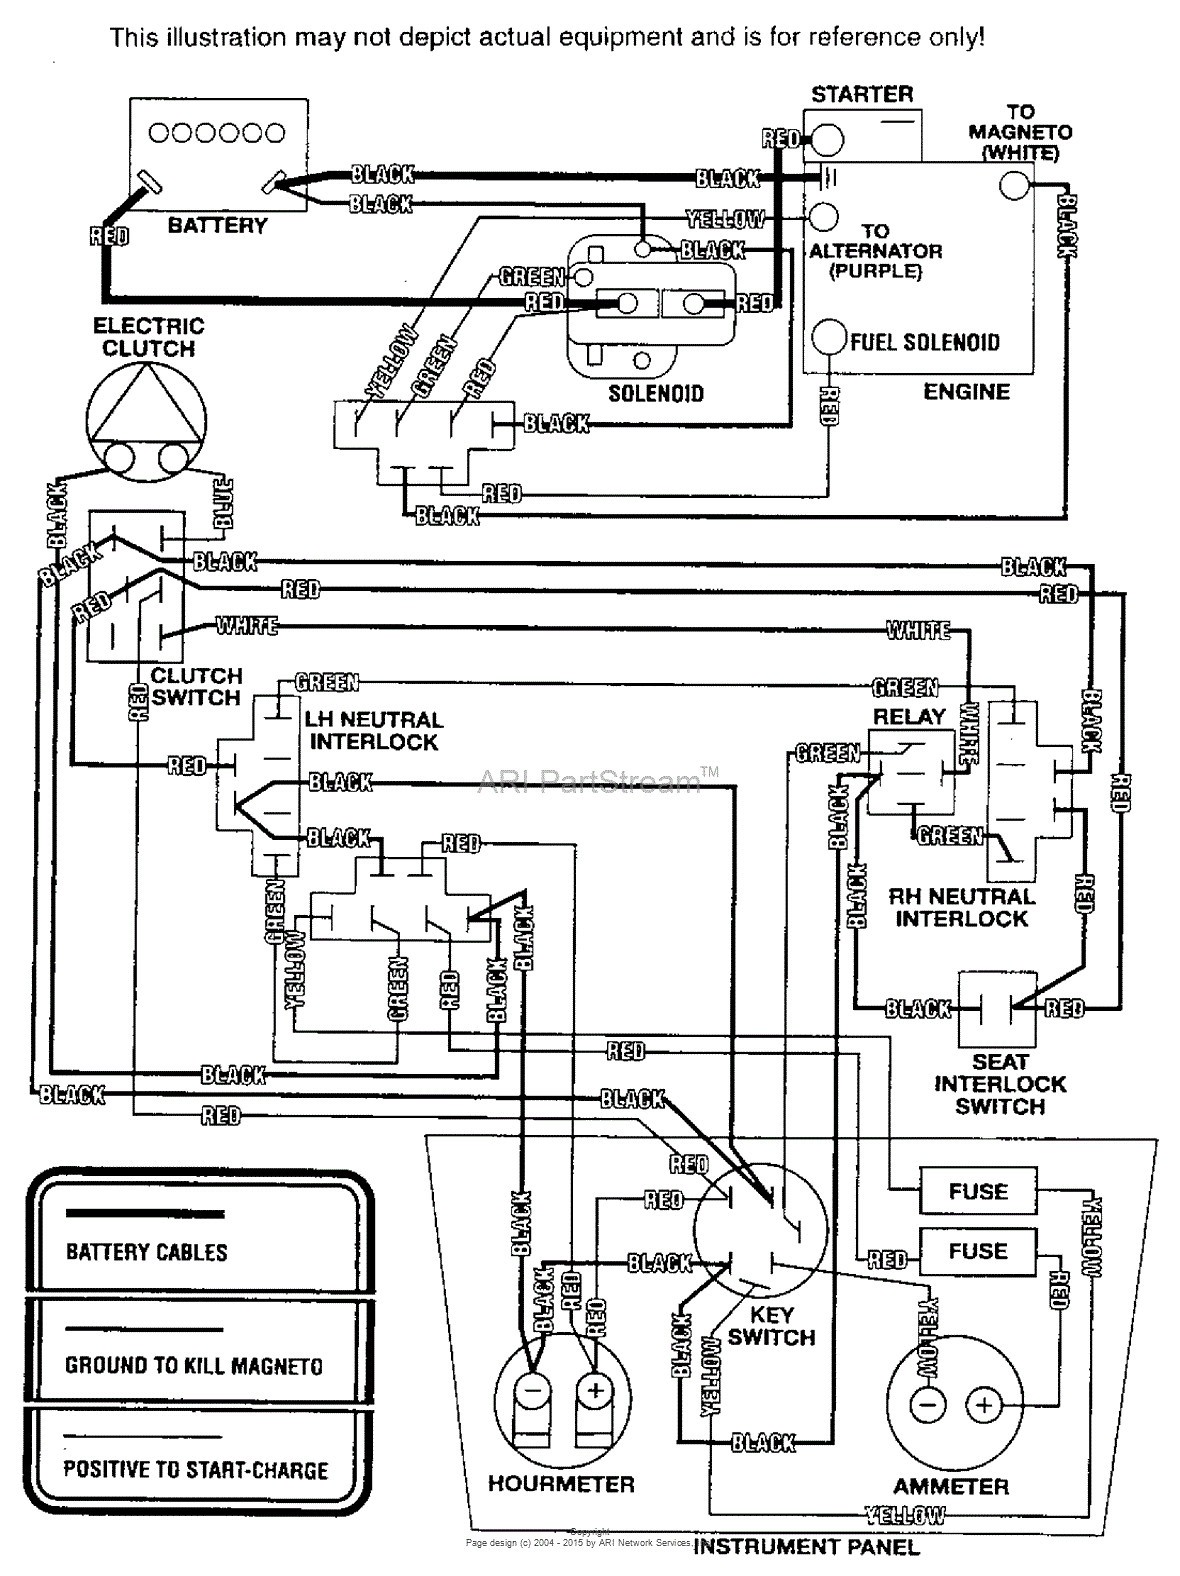 Scag SSZ4216BV Parts Diagram For ELECTRICAL WIRING Entrancing Briggs And Stratton Wiring